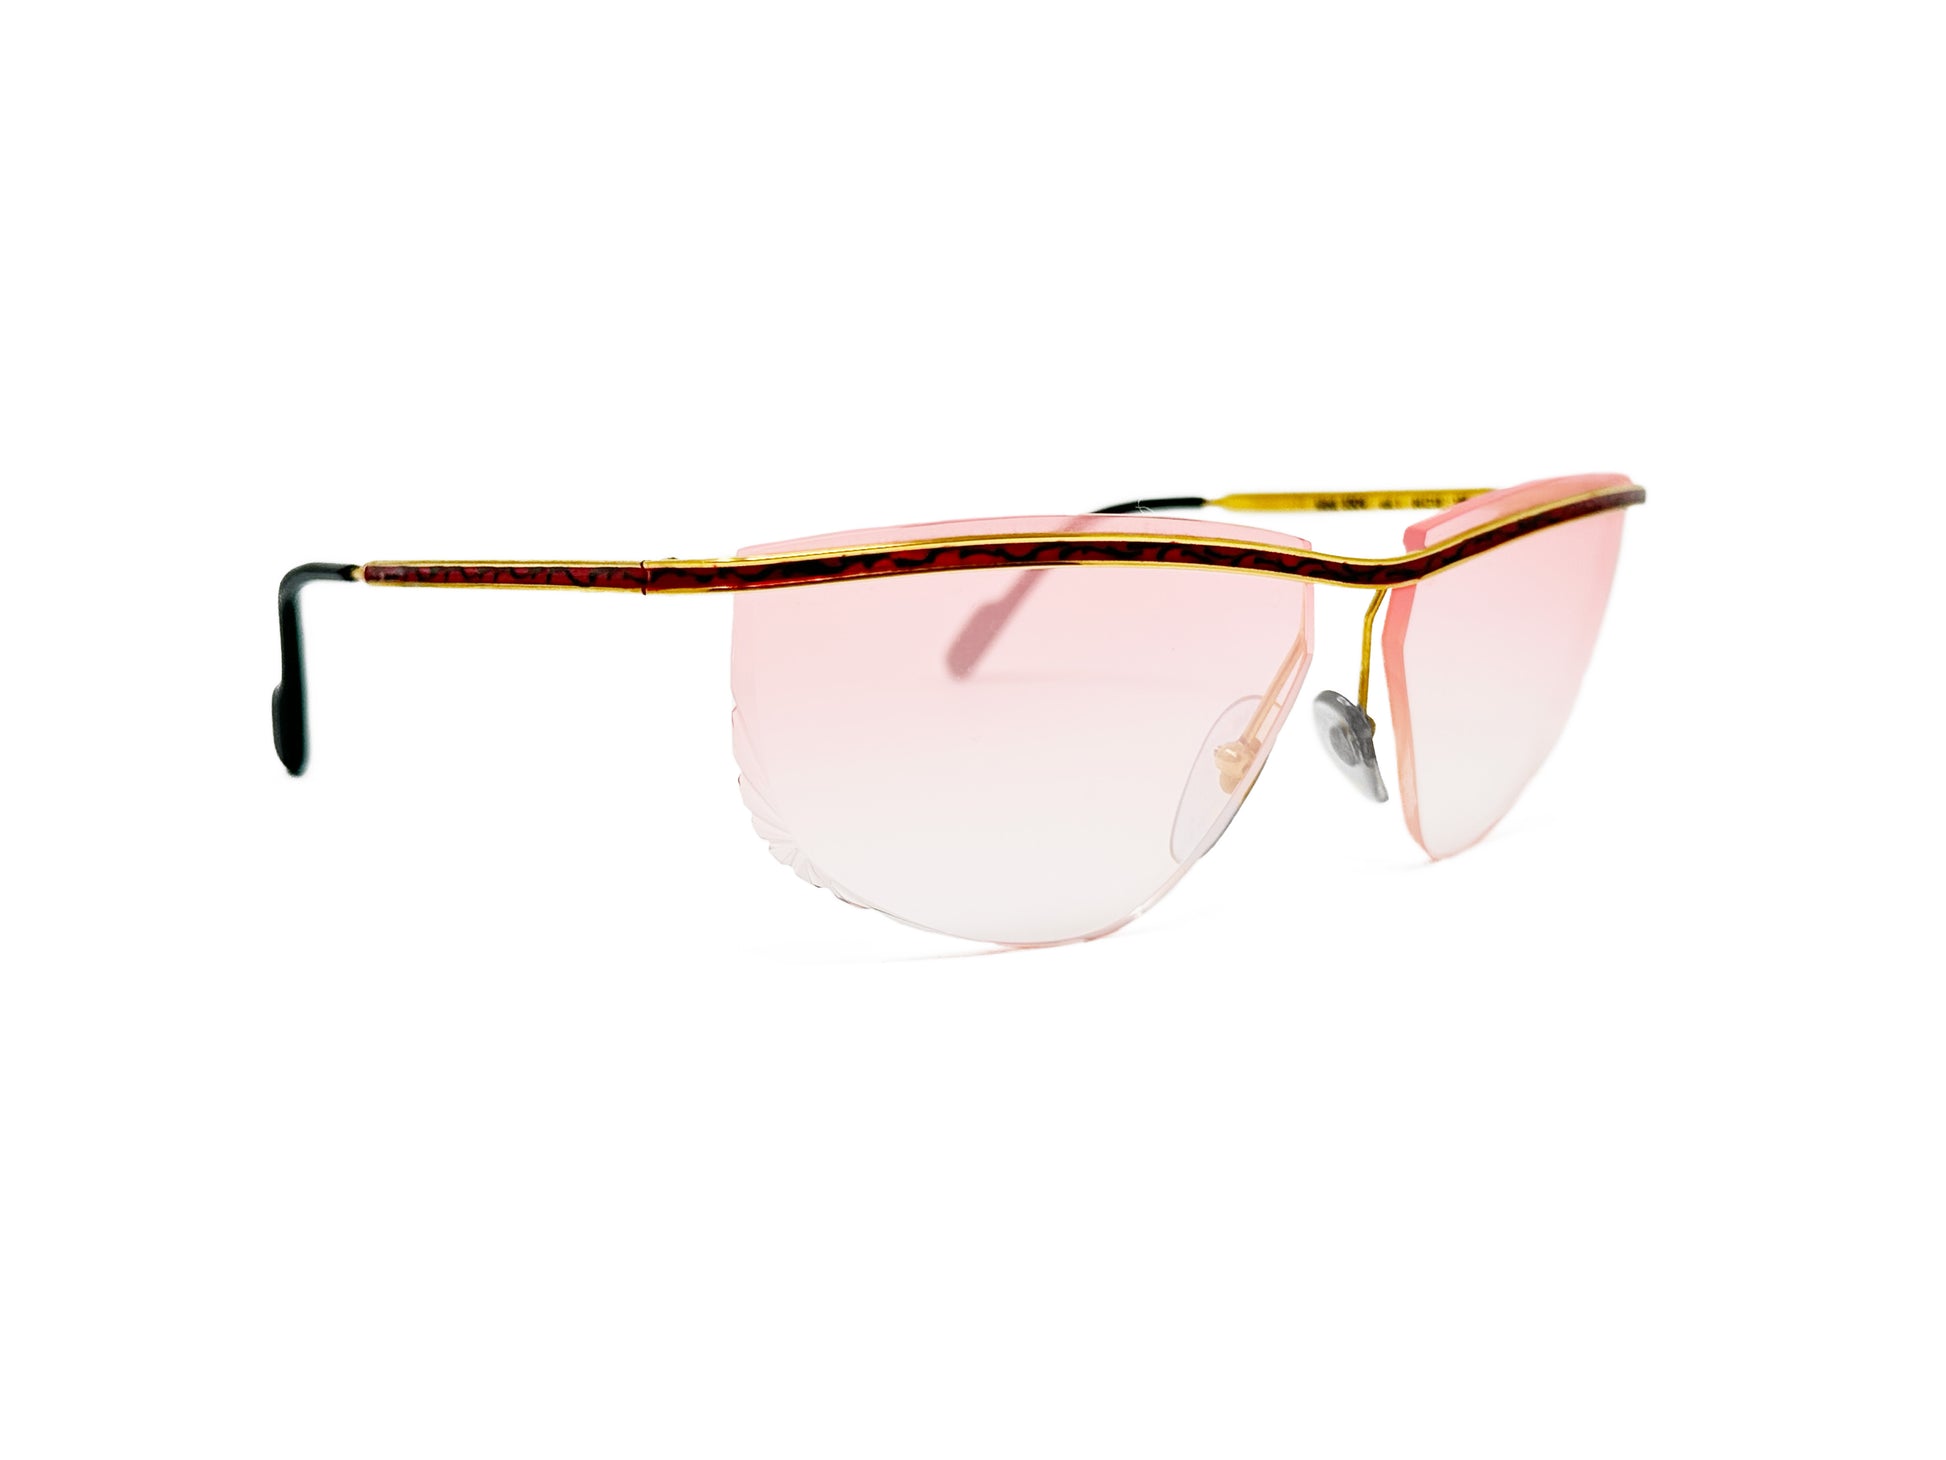 Lozza metal rimless optical frame with bar across front of frame. Model: 5504. Color: 1 - Red marble with gold. Side view.